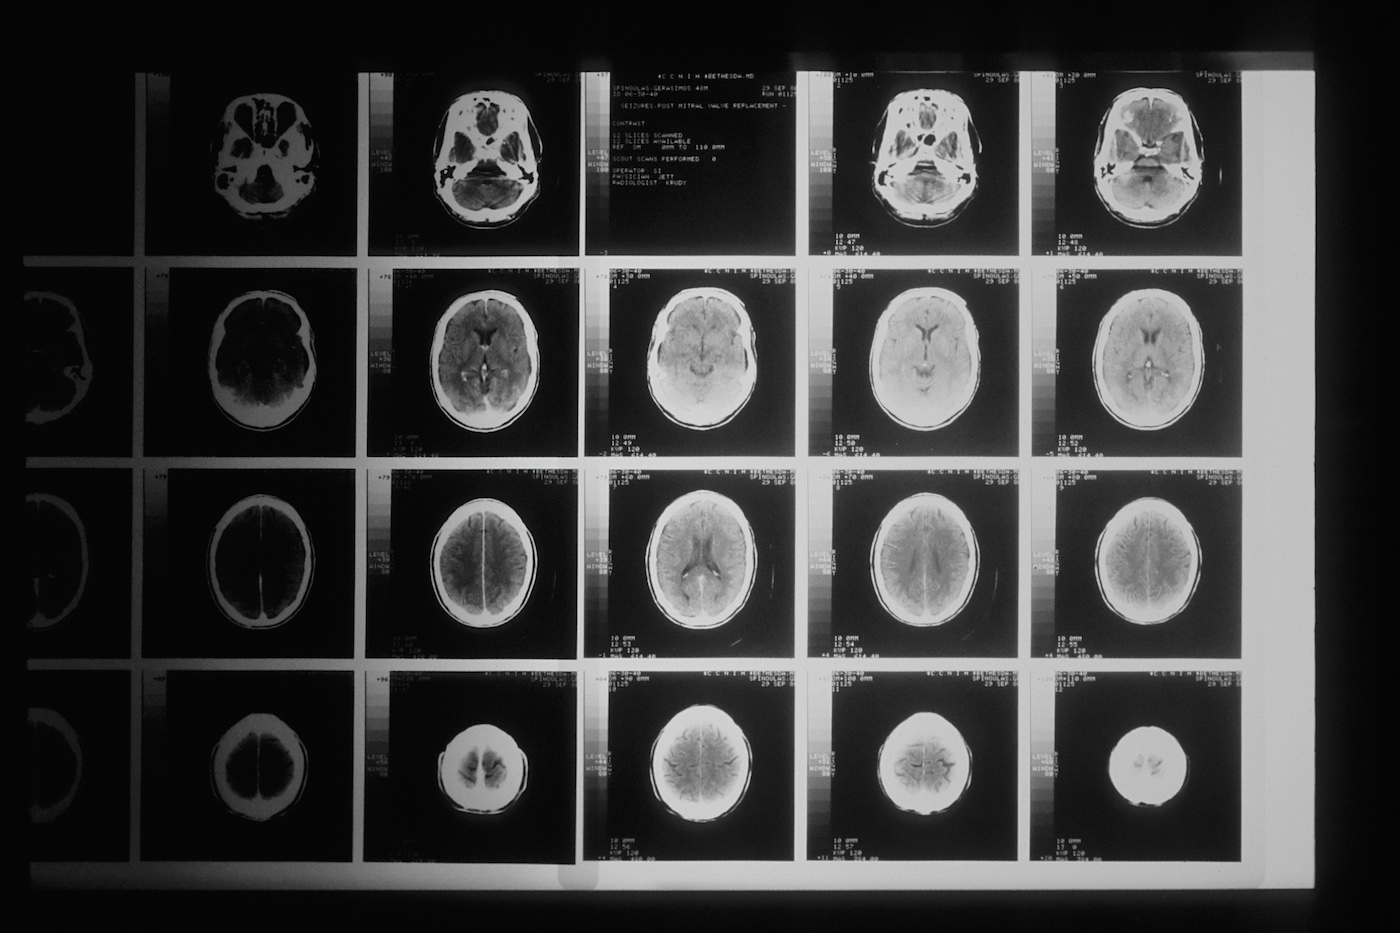 An X-ray of the head taken by CAT scan. Multiple rows of the scan show the head and brain at various stages of the imaging process.